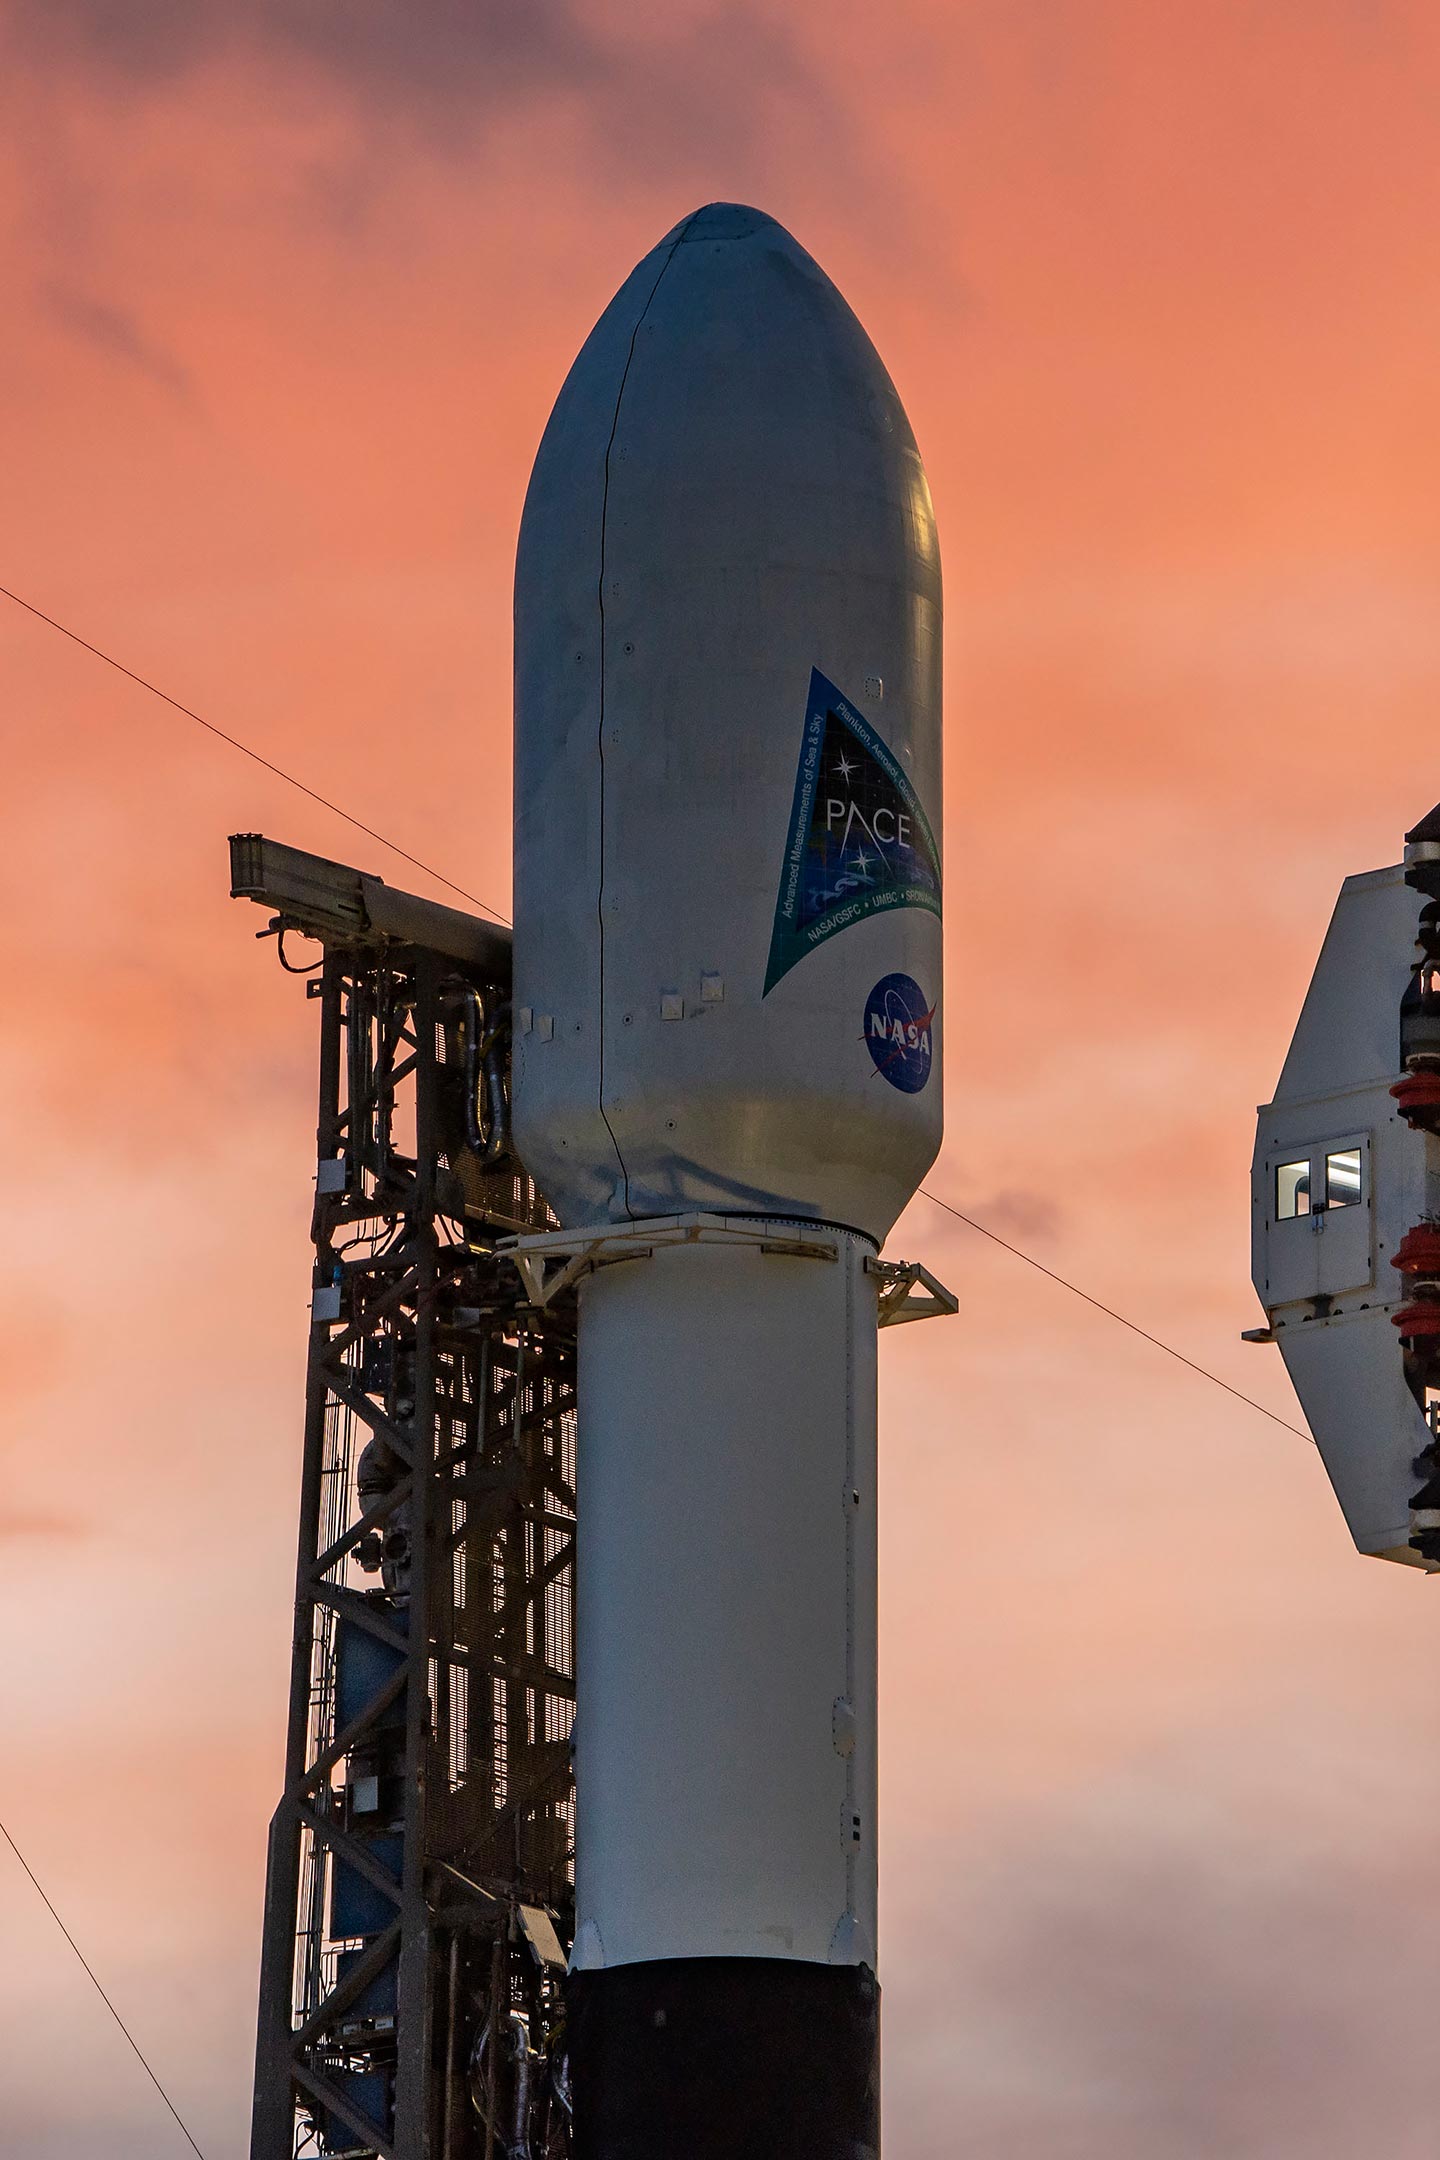 SpaceX-Falcon-9-Rocket-With-NASA-PACE-Spacecraft.jpg